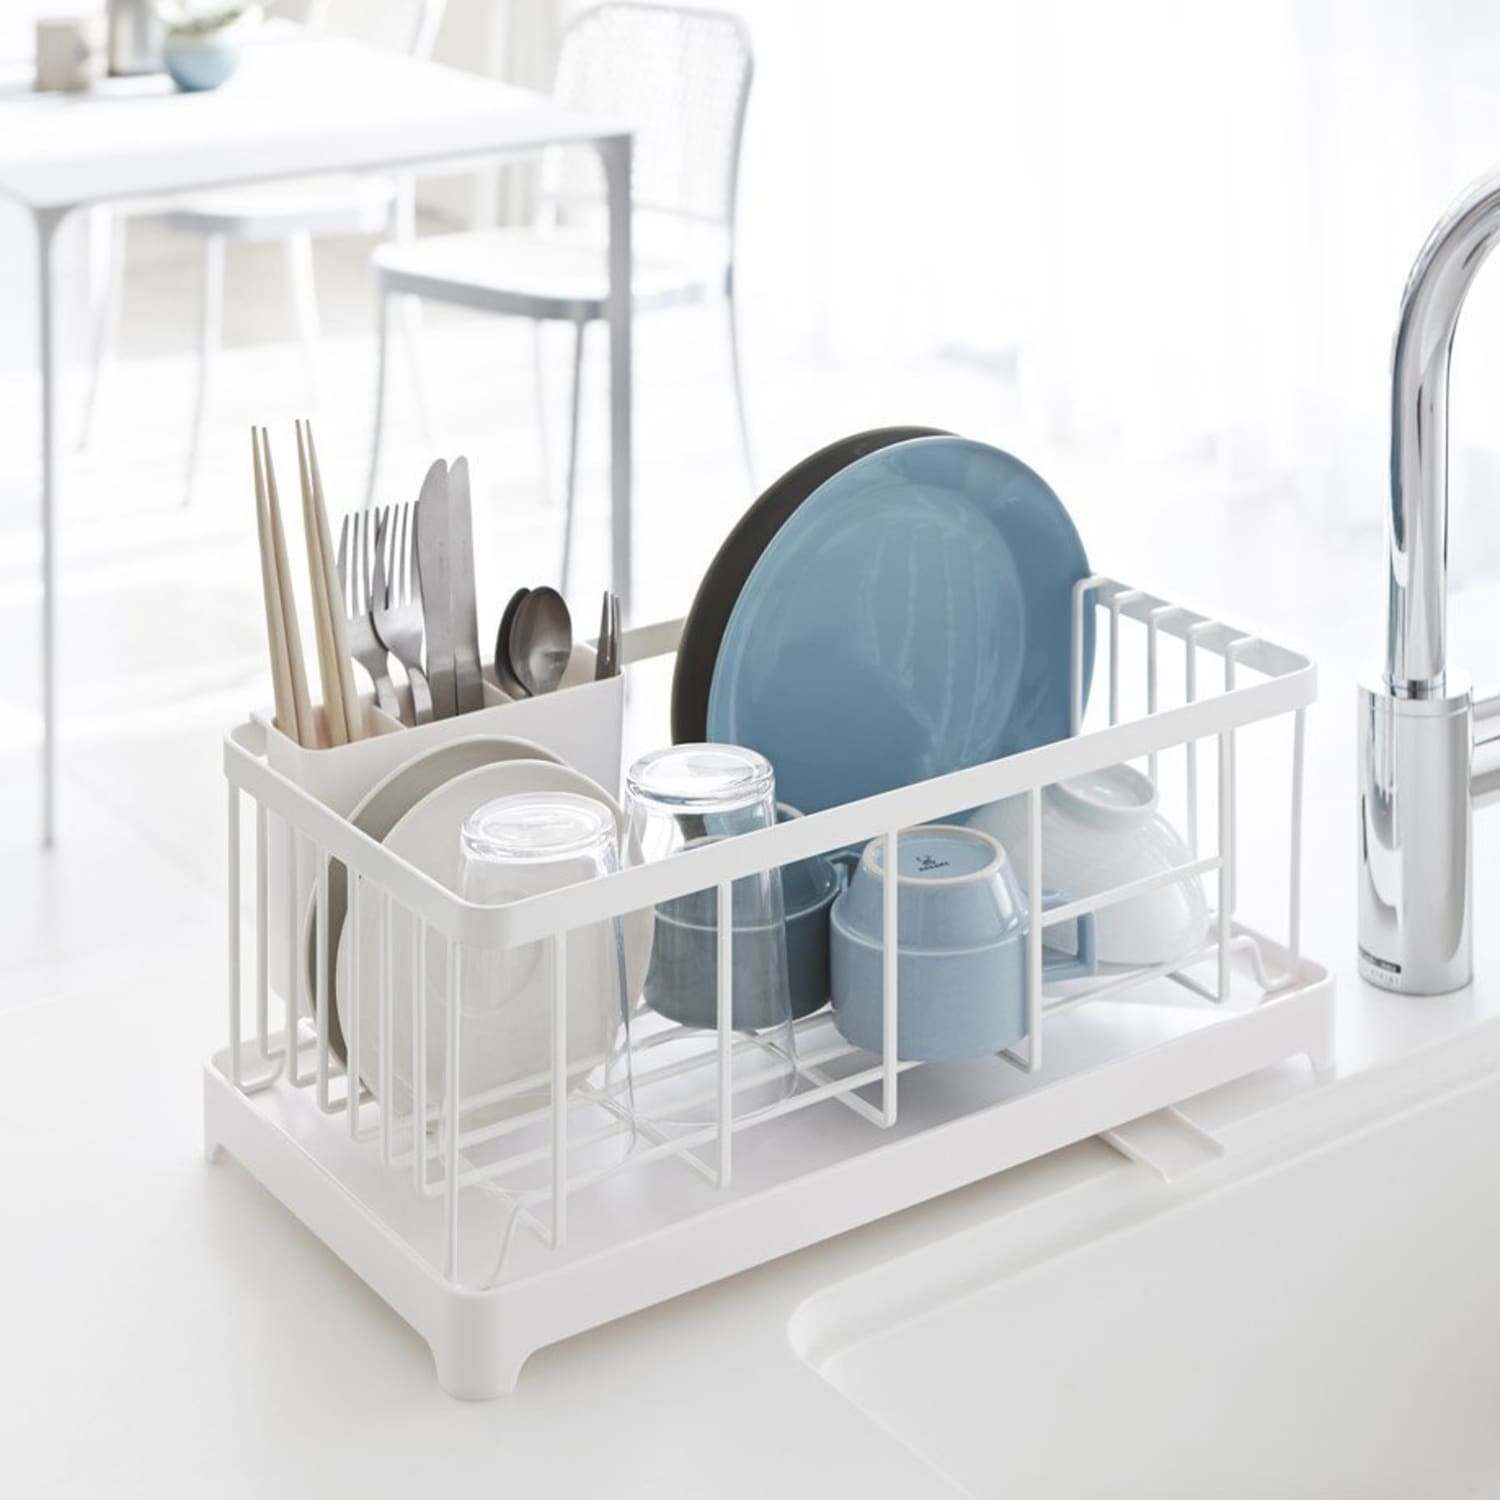 Top 10 Well-Designed Dish Racks for Small Kitchens